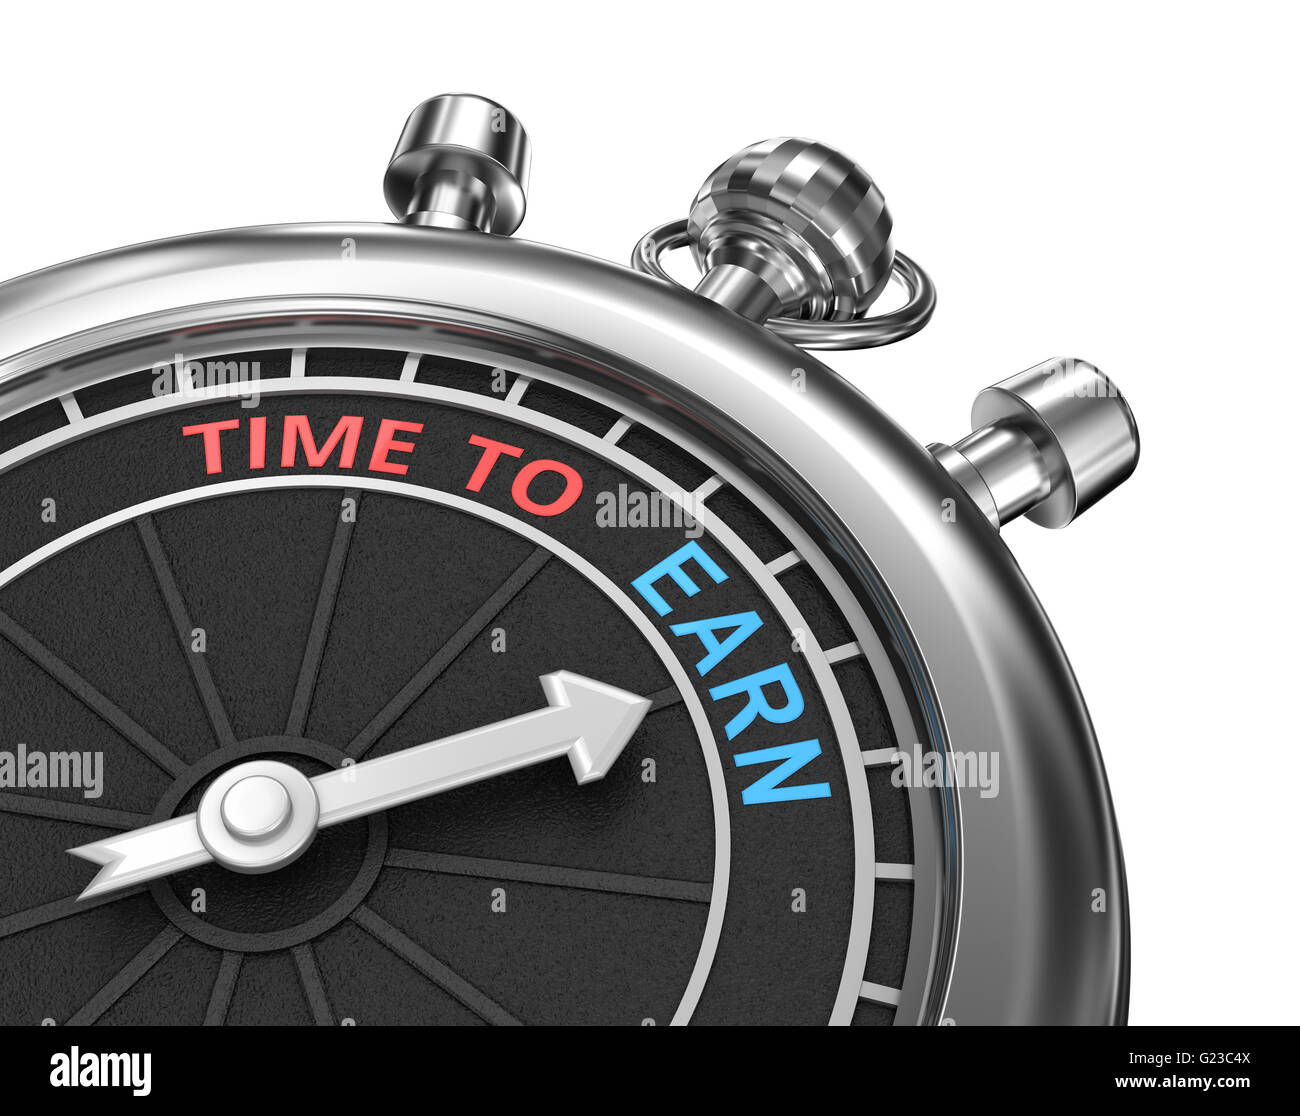 Time to earn timepiece 3d concept , isolated Stock Photo